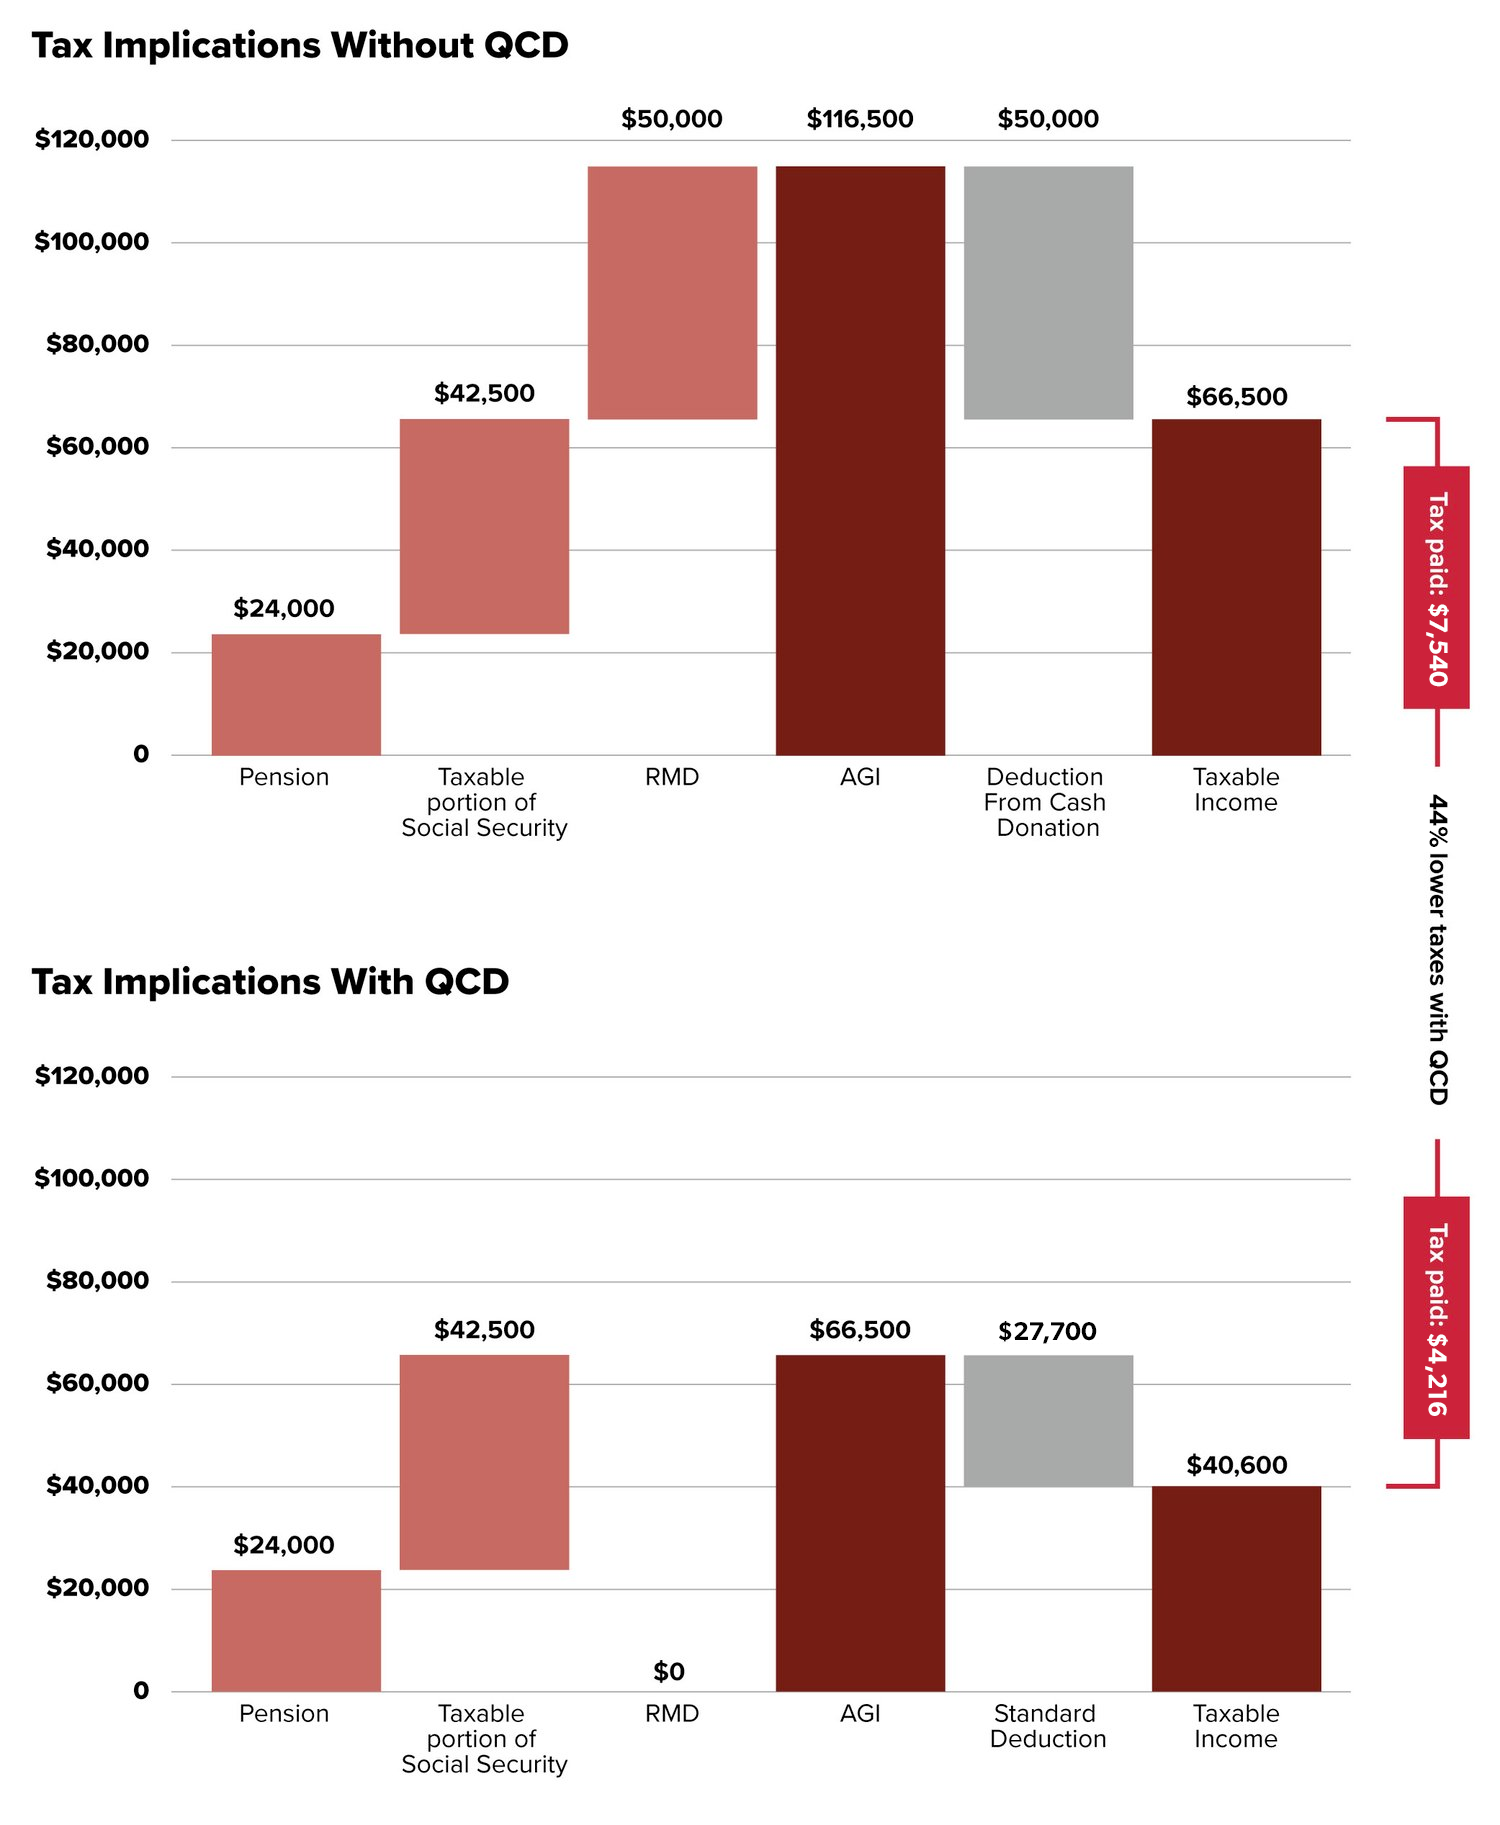 chart showing tax implications with and without QCD